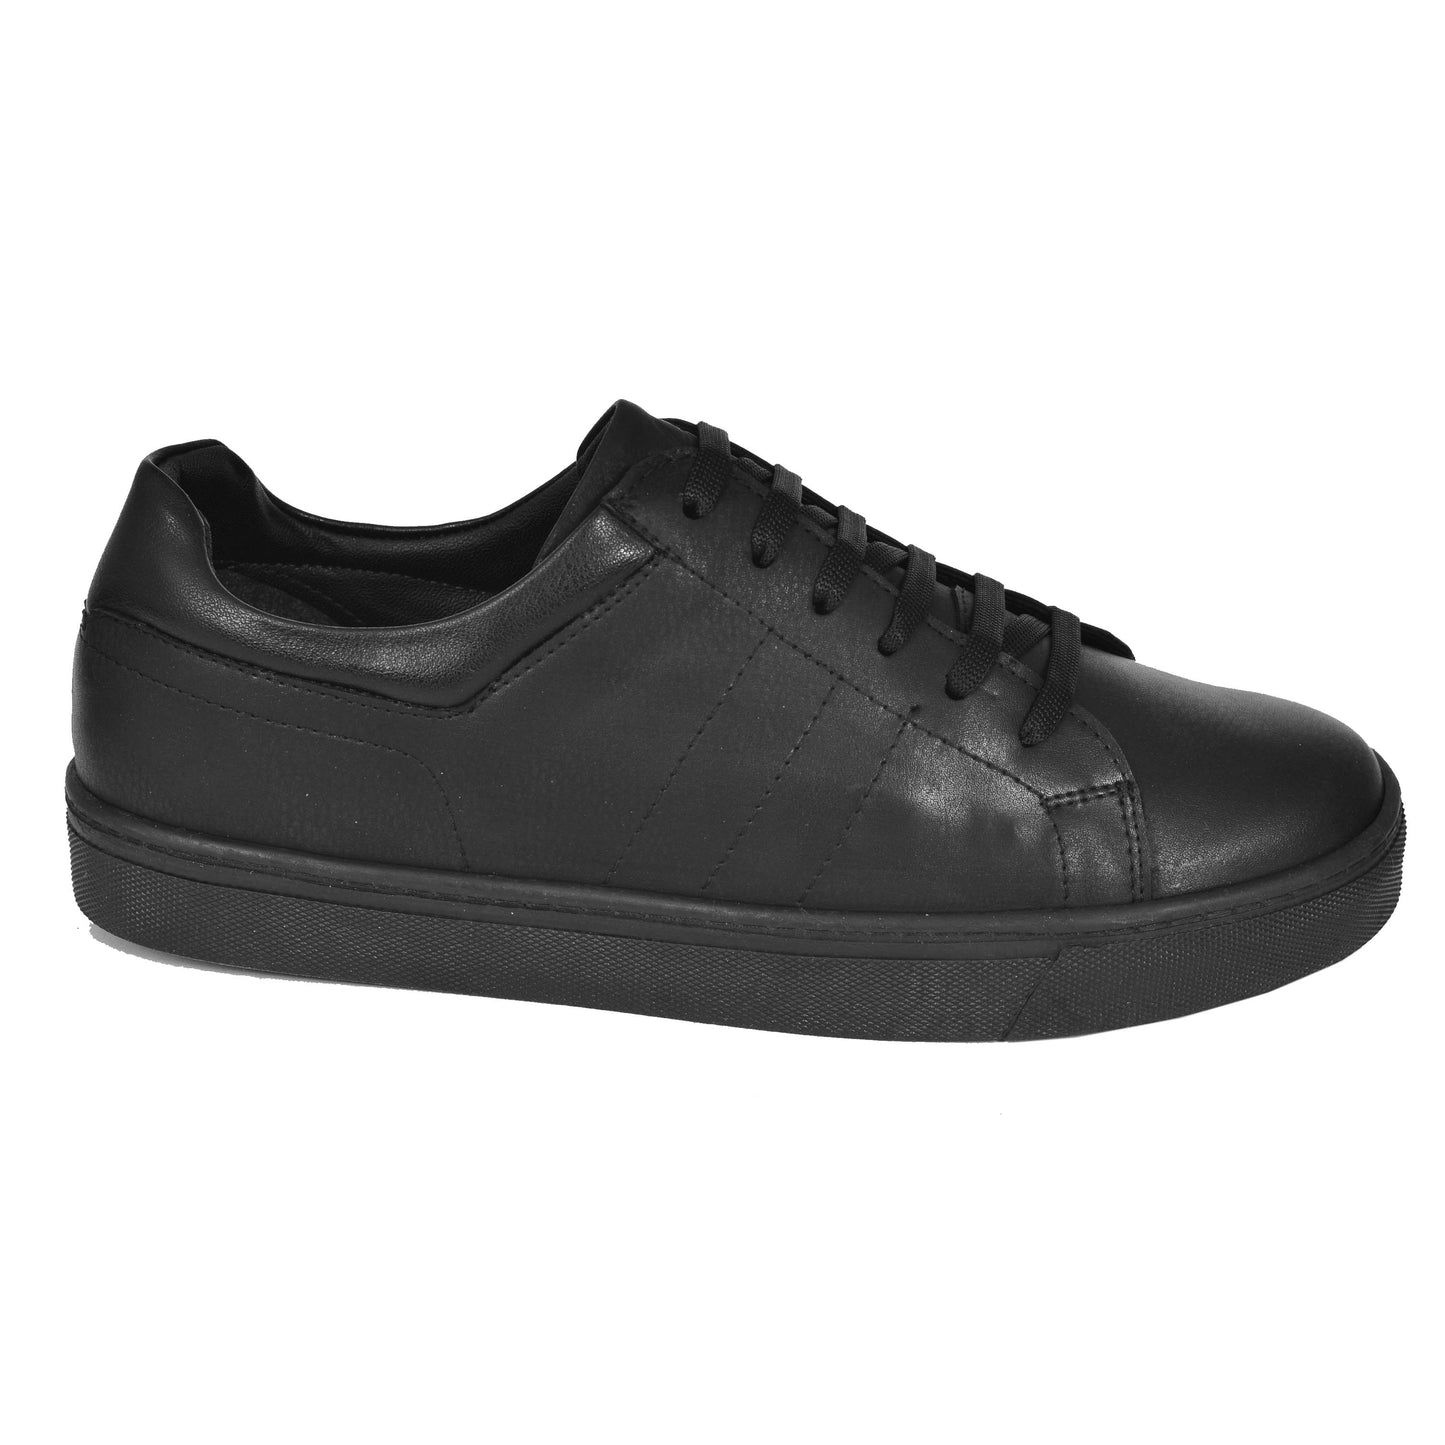 2H #9507 Black Casual Shoes